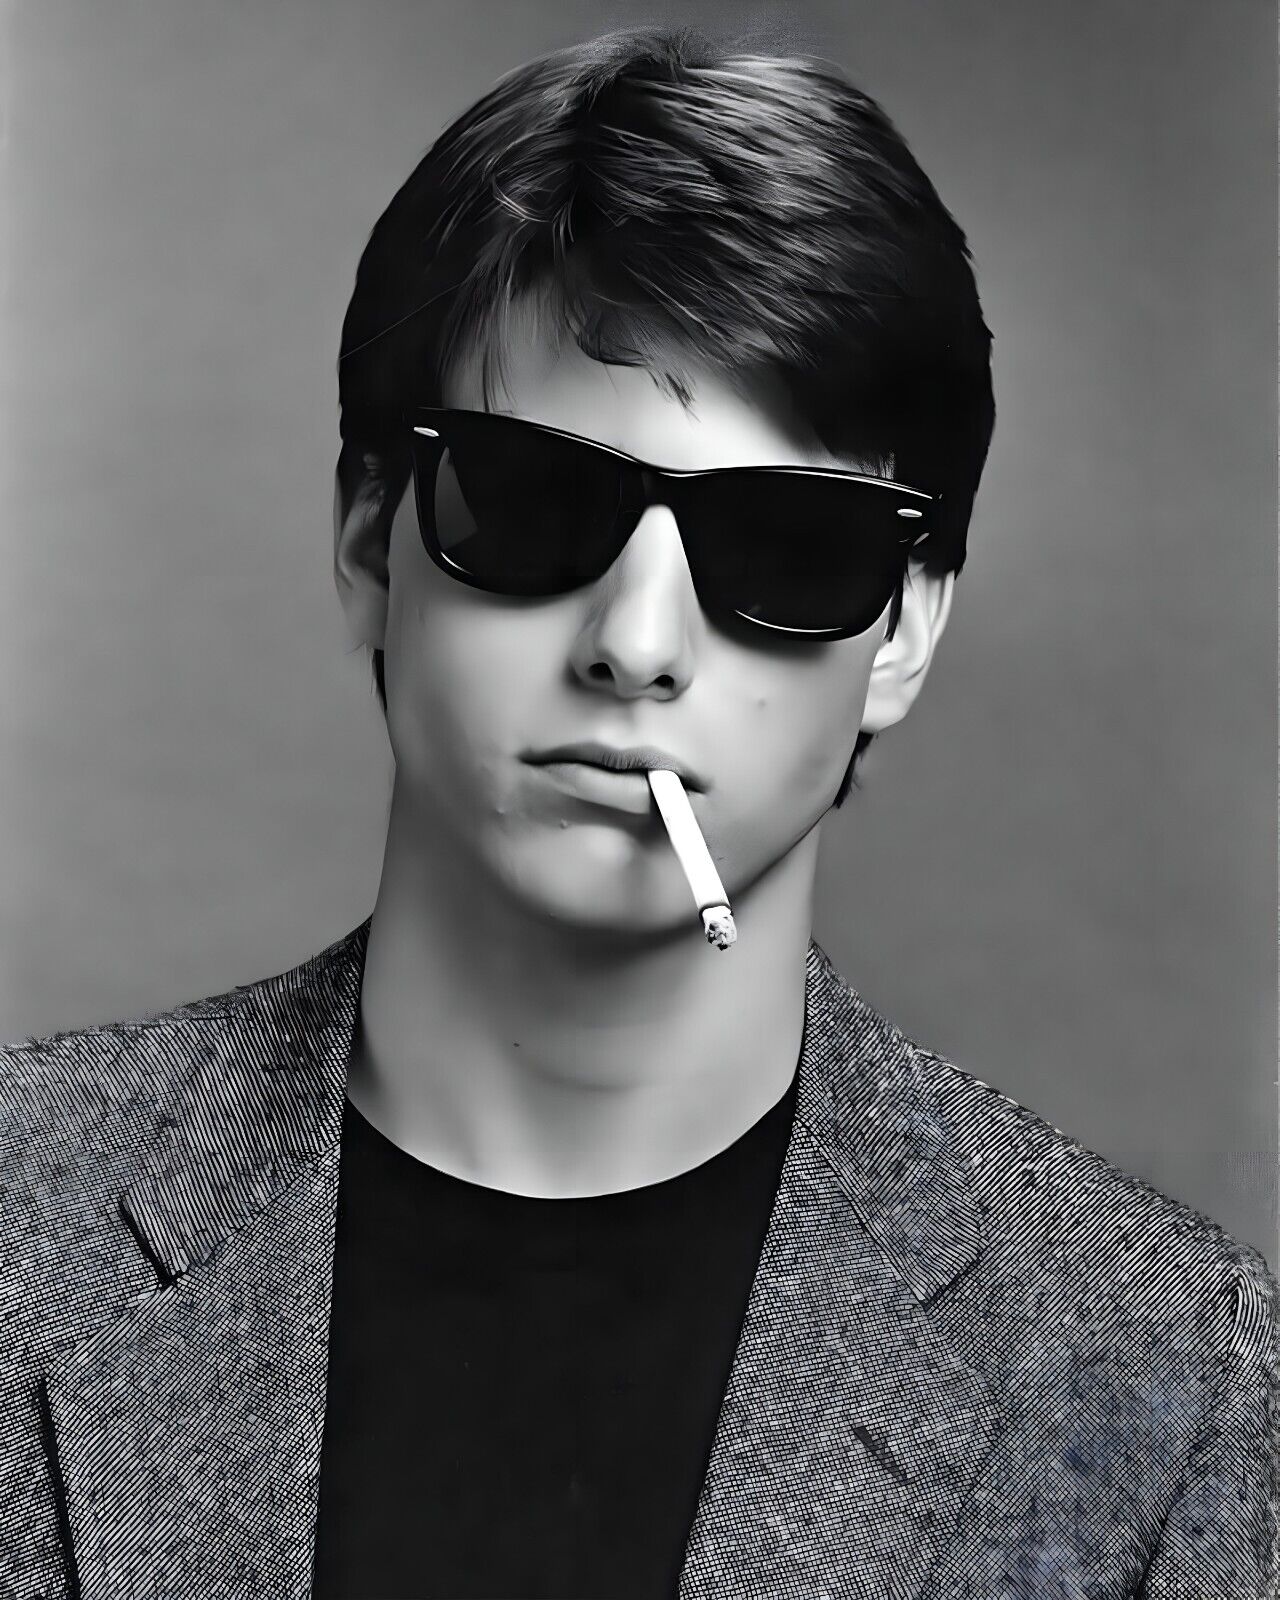 Tom Cruise Risky Business 8 x 10 Photograph Art Print Photo Picture